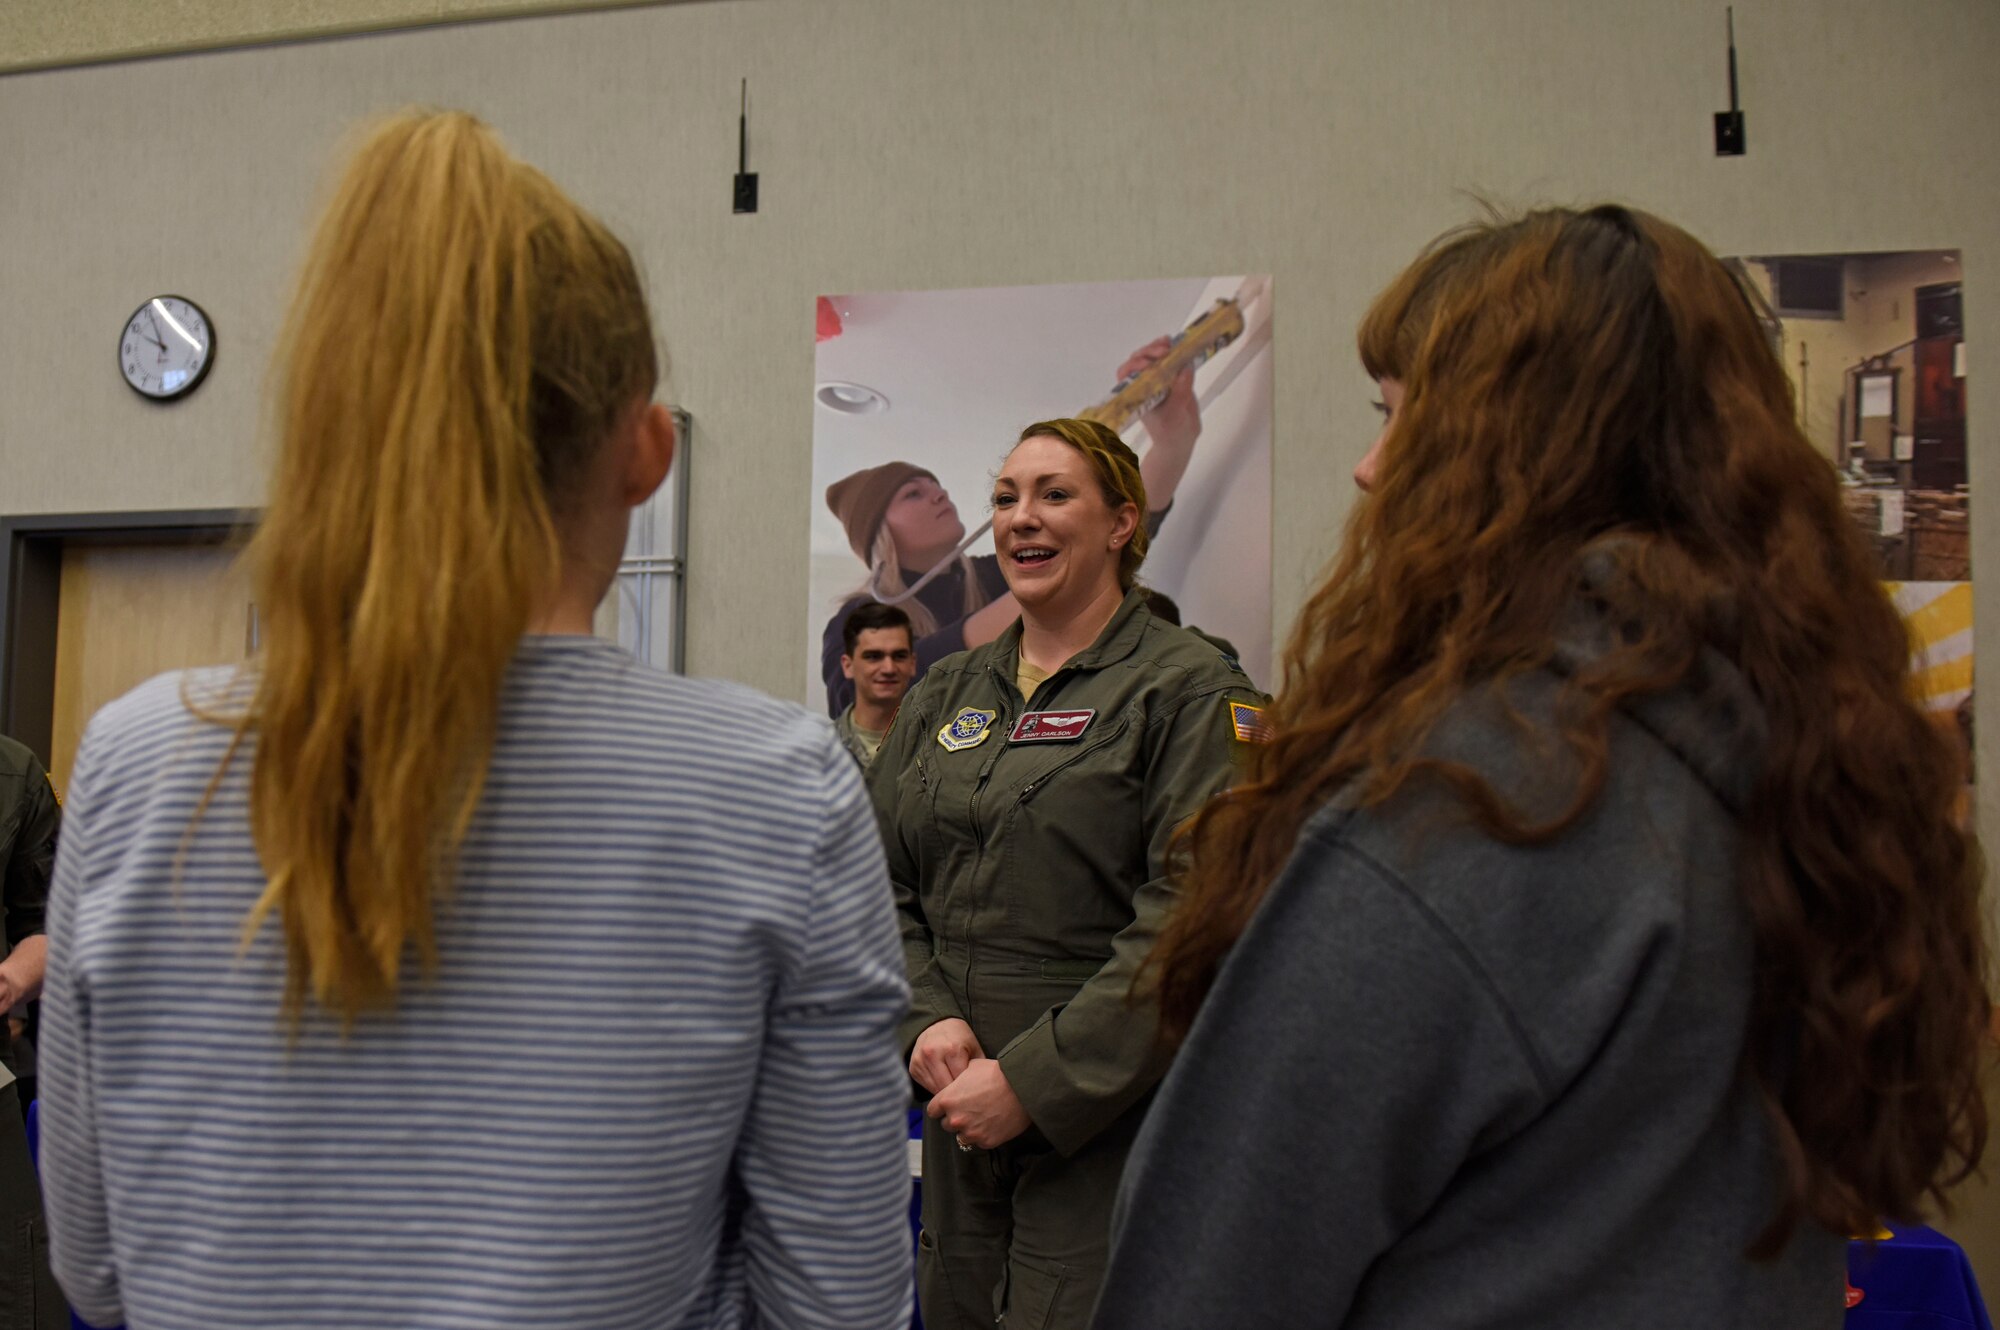 U.S. Air Force Capt. Jennifer Carlson, 384th Air Refueling Squadron chief of training, talks to students on becoming a military aircraft pilot during the annual NEWTech Skills Center job fair in Spokane, Washington, April 24, 2019. By participating in the job fair, Team Fairchild Airmen and community members seek the opportunity to inspire America’s future leaders to learn about the endless opportunities there are in the community and in the Air Force. (U.S. Air Force photo by Senior Airman Jesenia Landaverde)